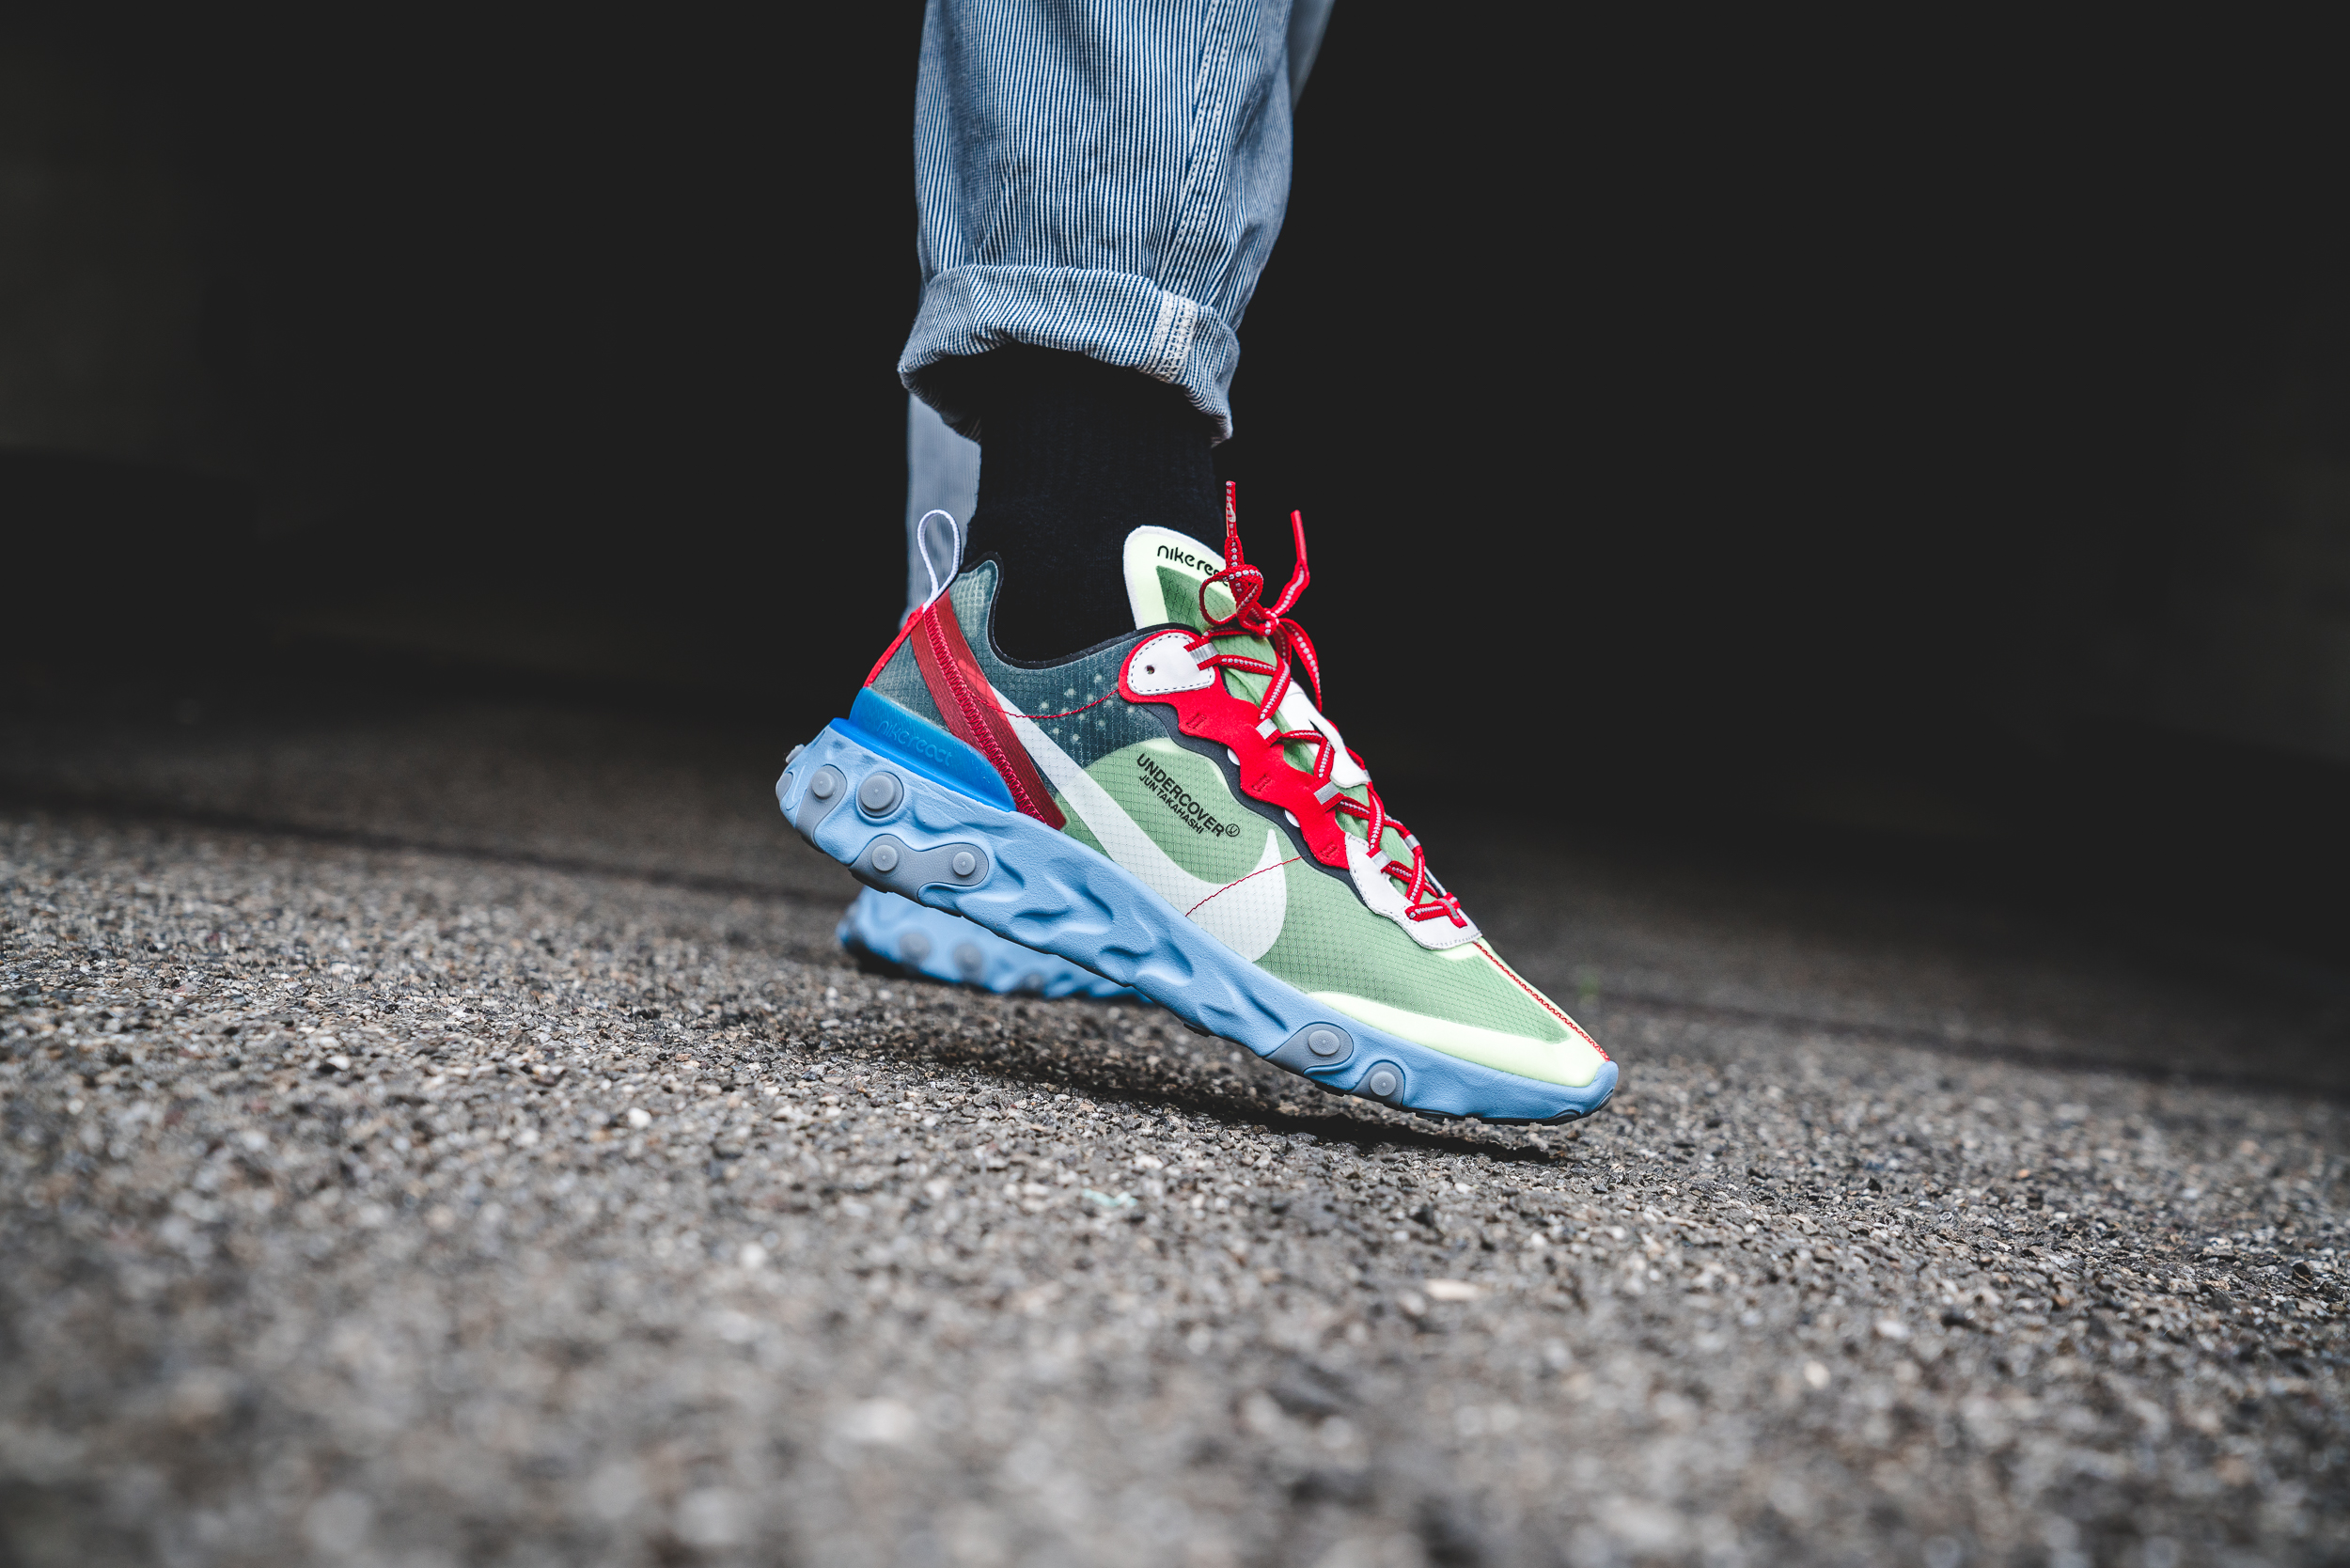 nike x undercover react element 87 lakeside & electric yellow